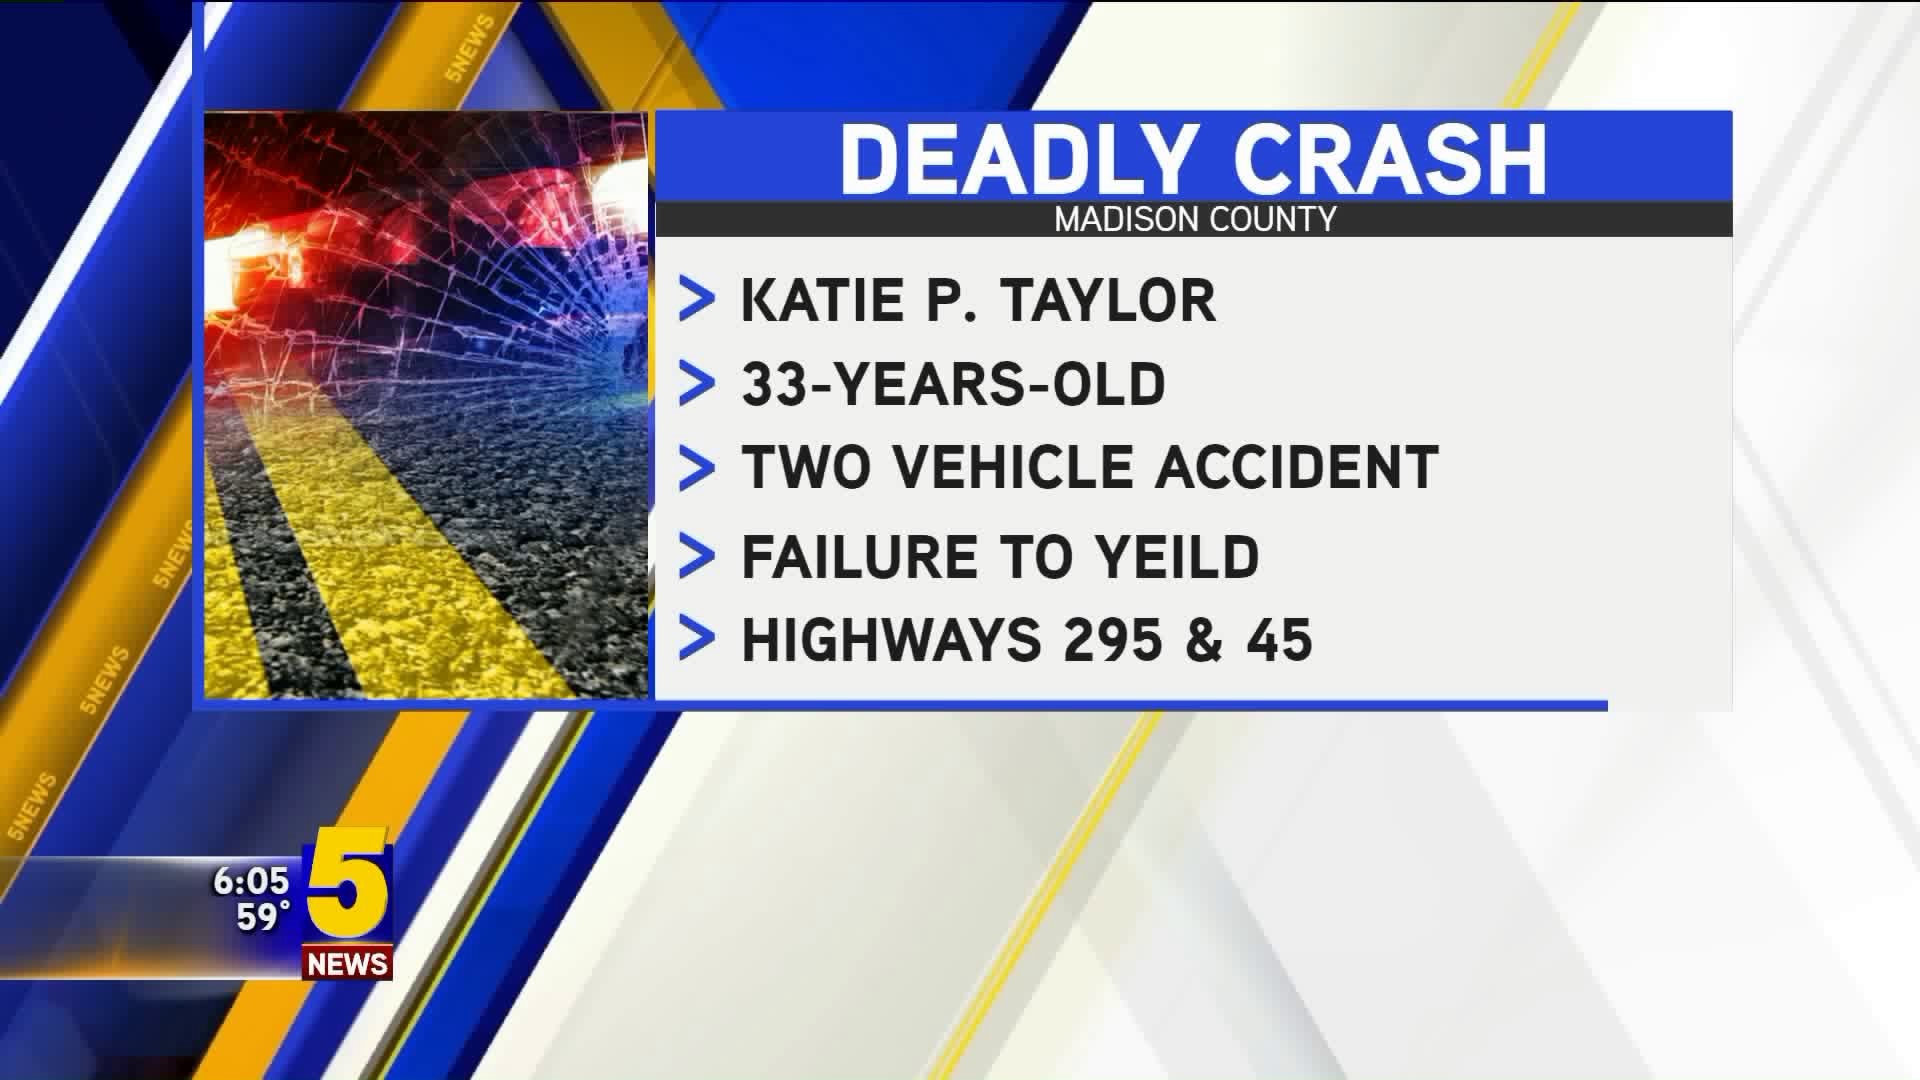 Deadly Crash In Madison County